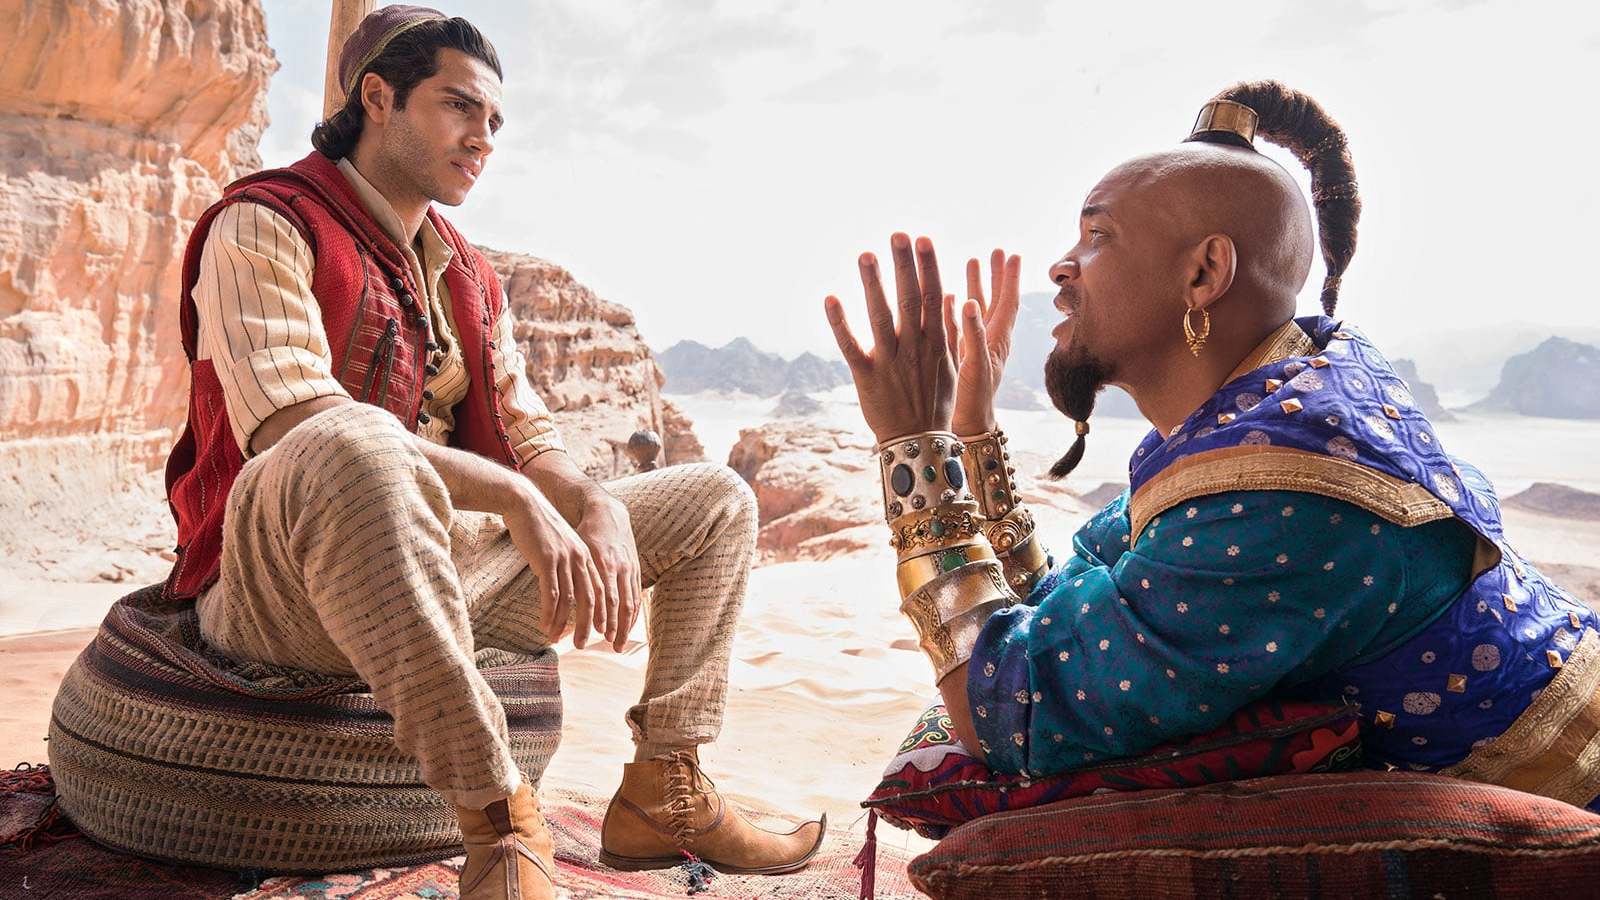 Aladdin 2: What We Know So Far About The Live-Action Disney Sequel